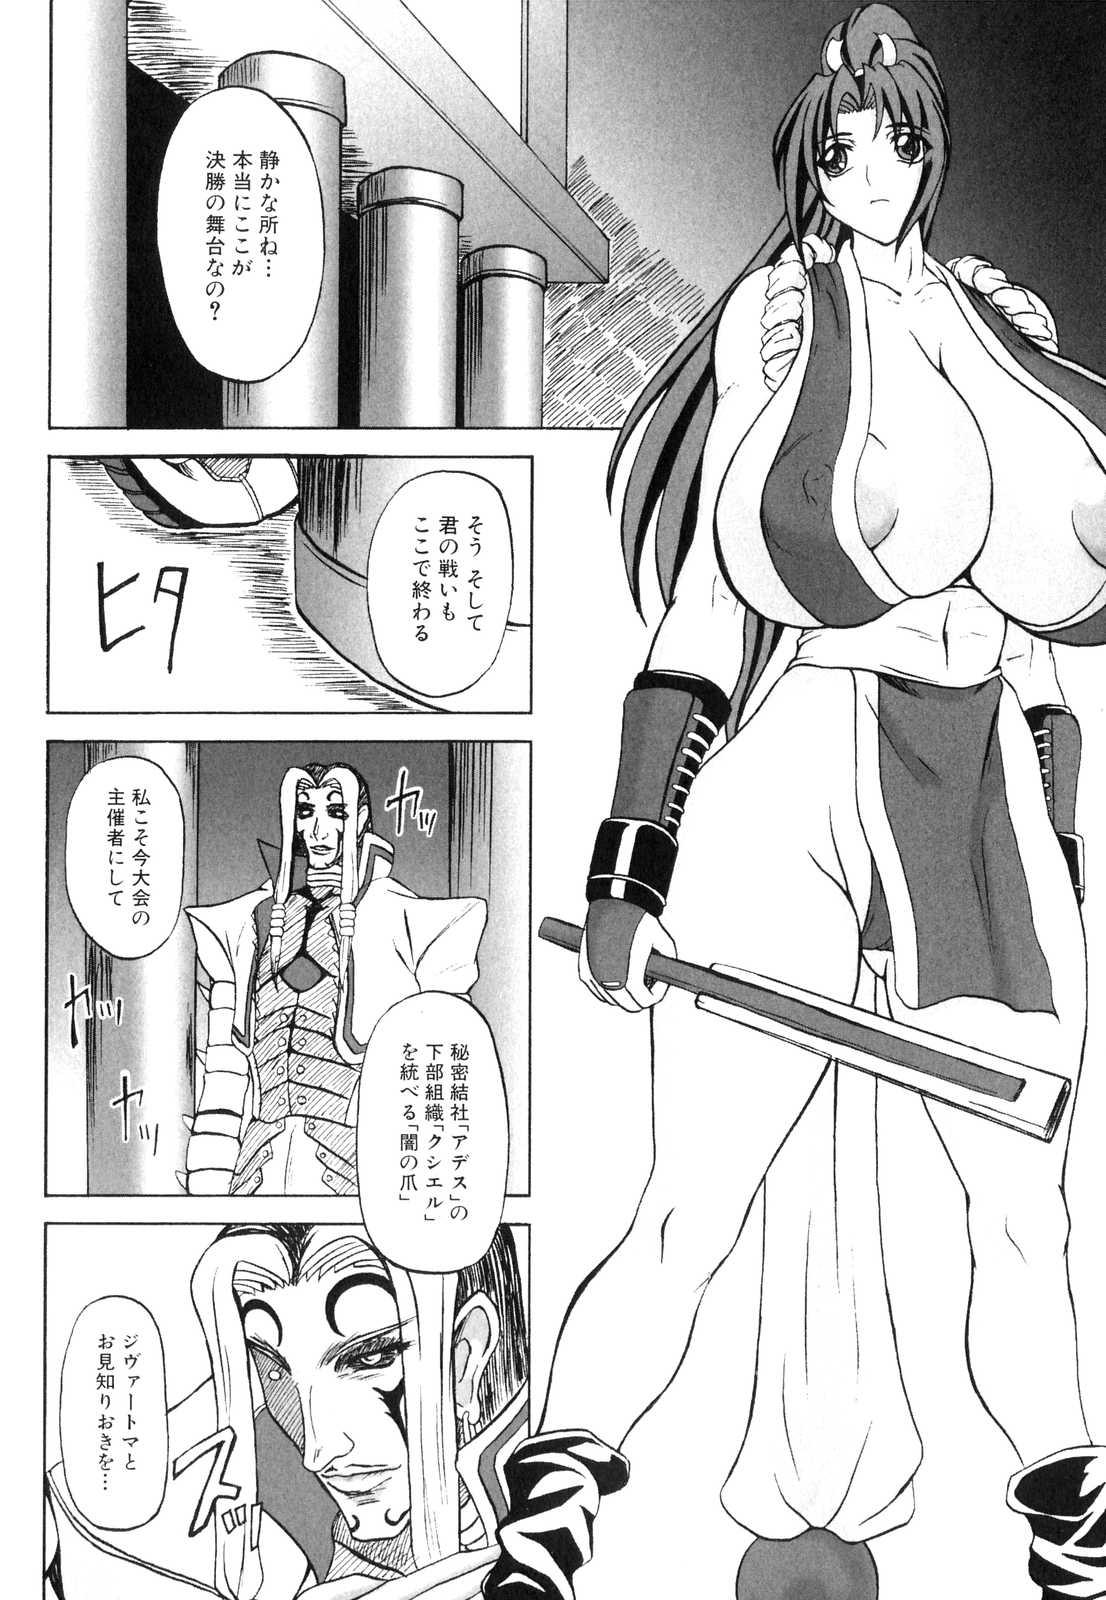 Kiss Mars Impact - King of fighters Celeb - Page 3